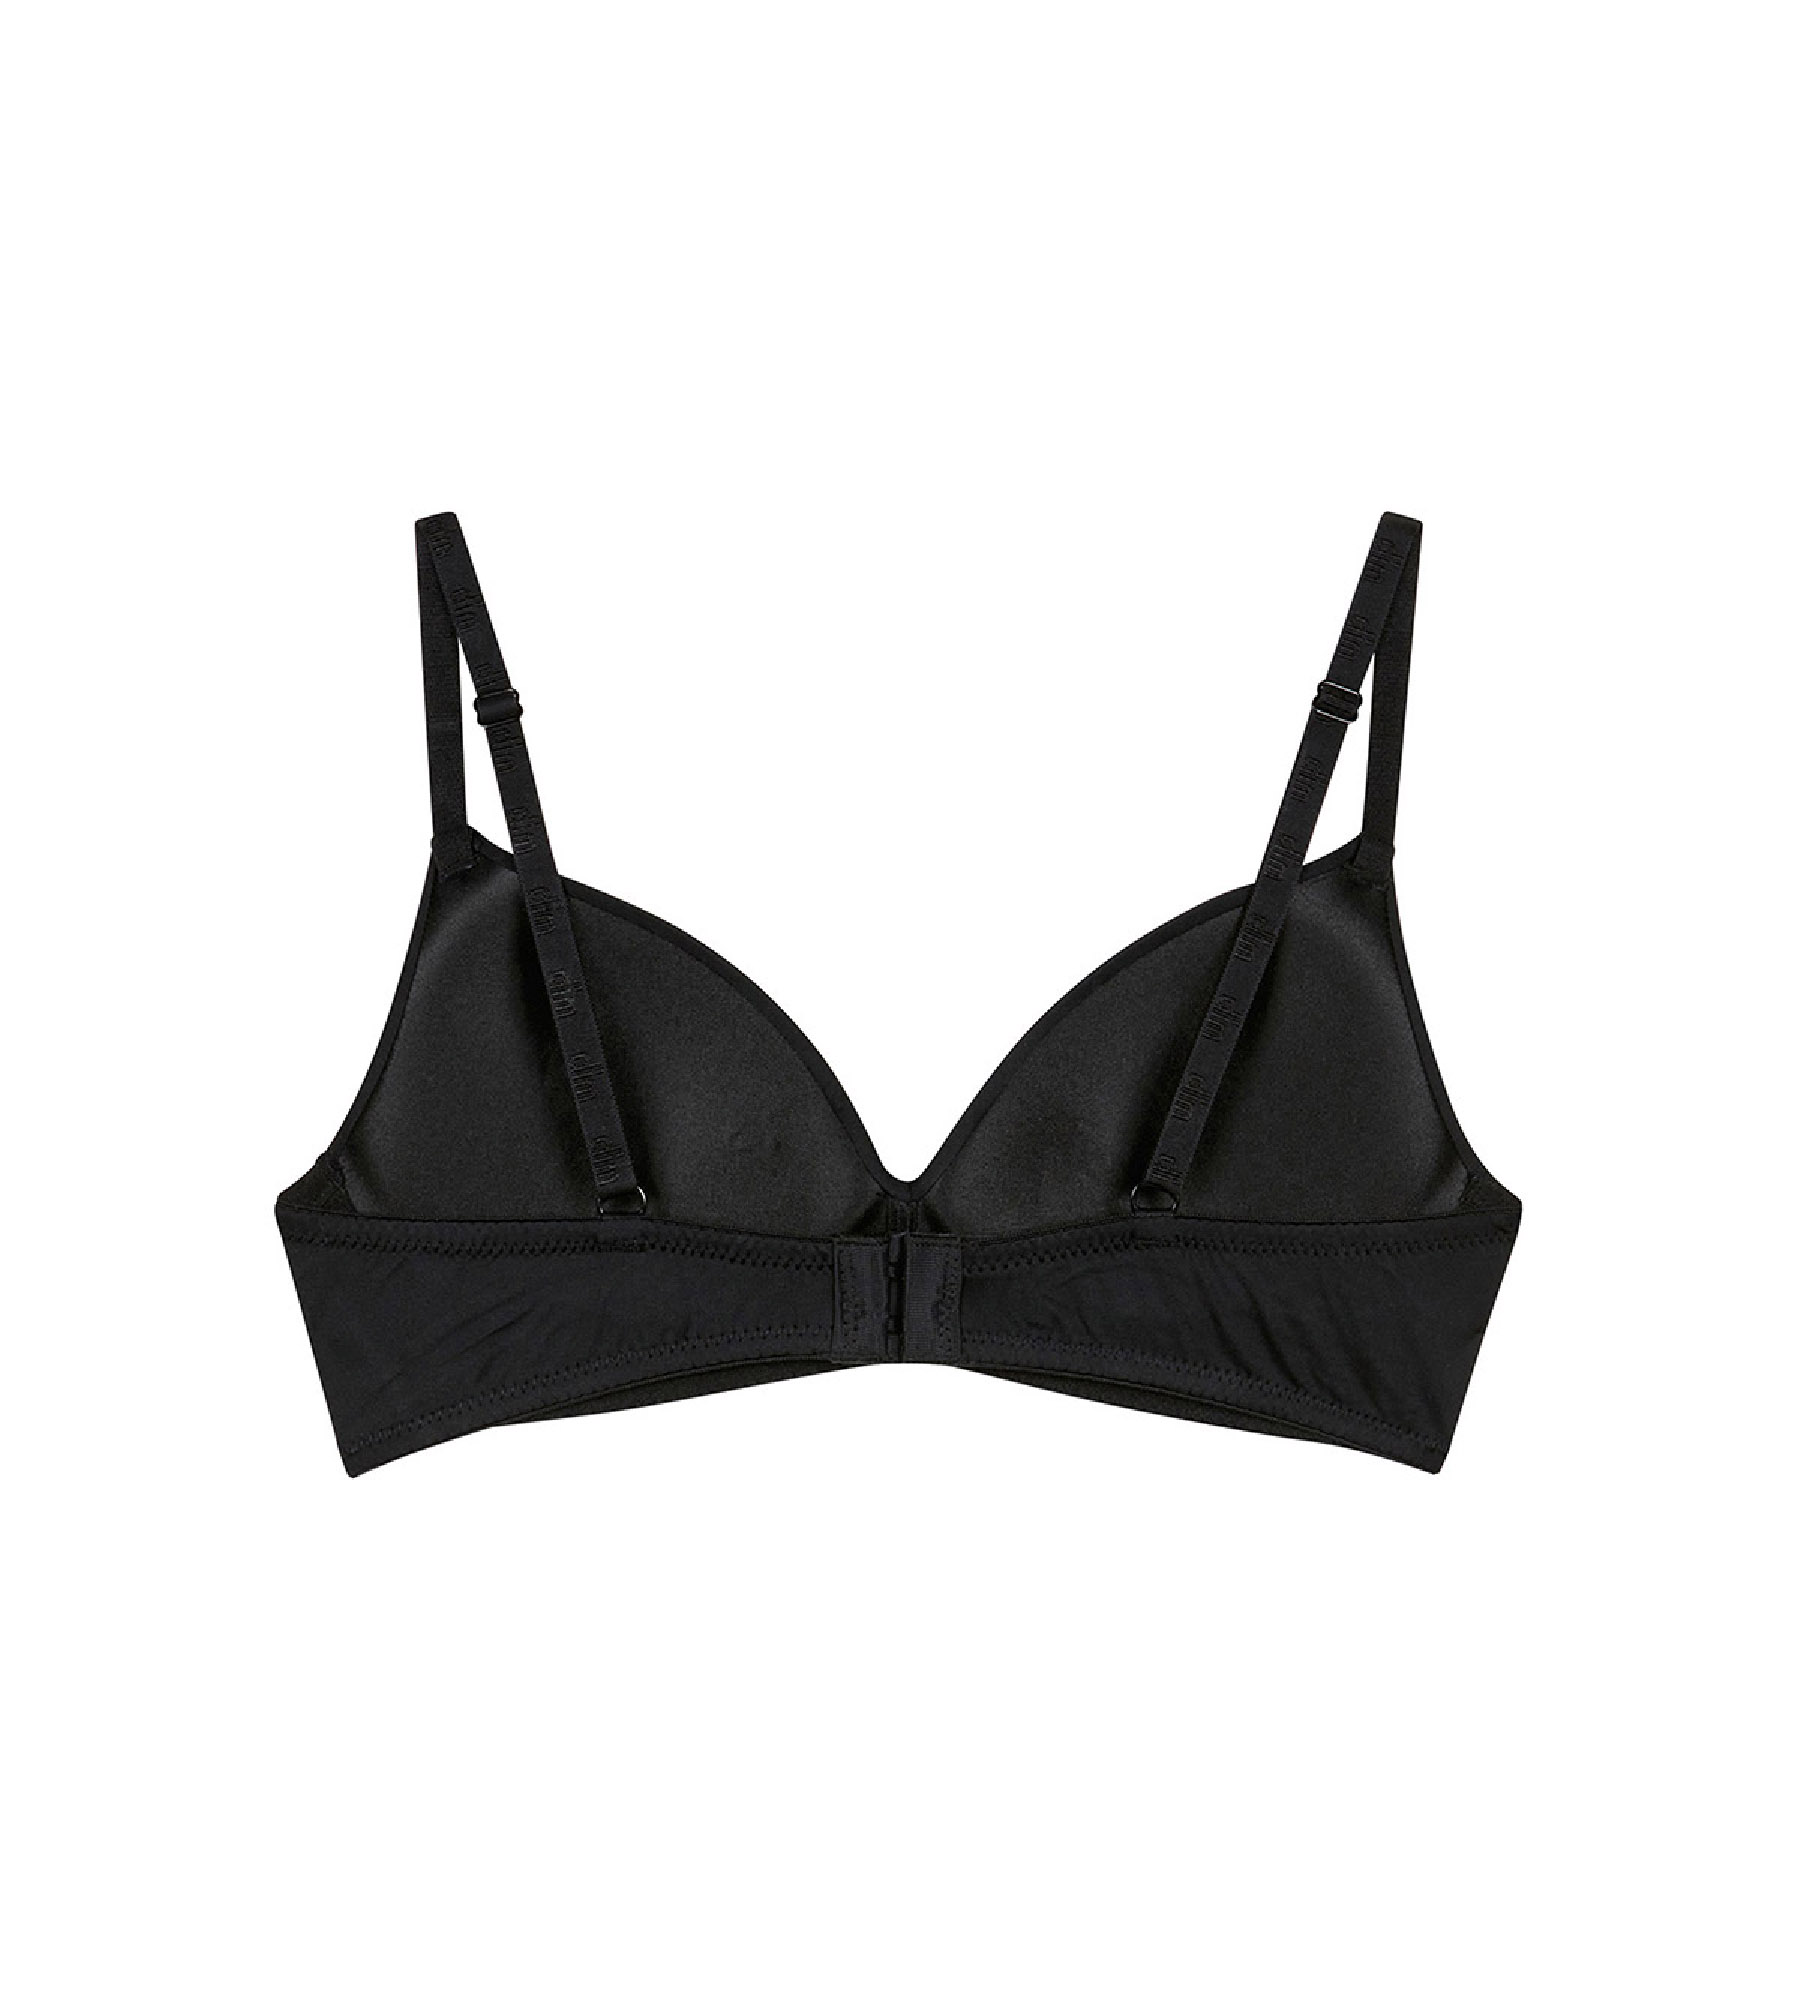 Black triangle bra with cups for girls Dim Invisible